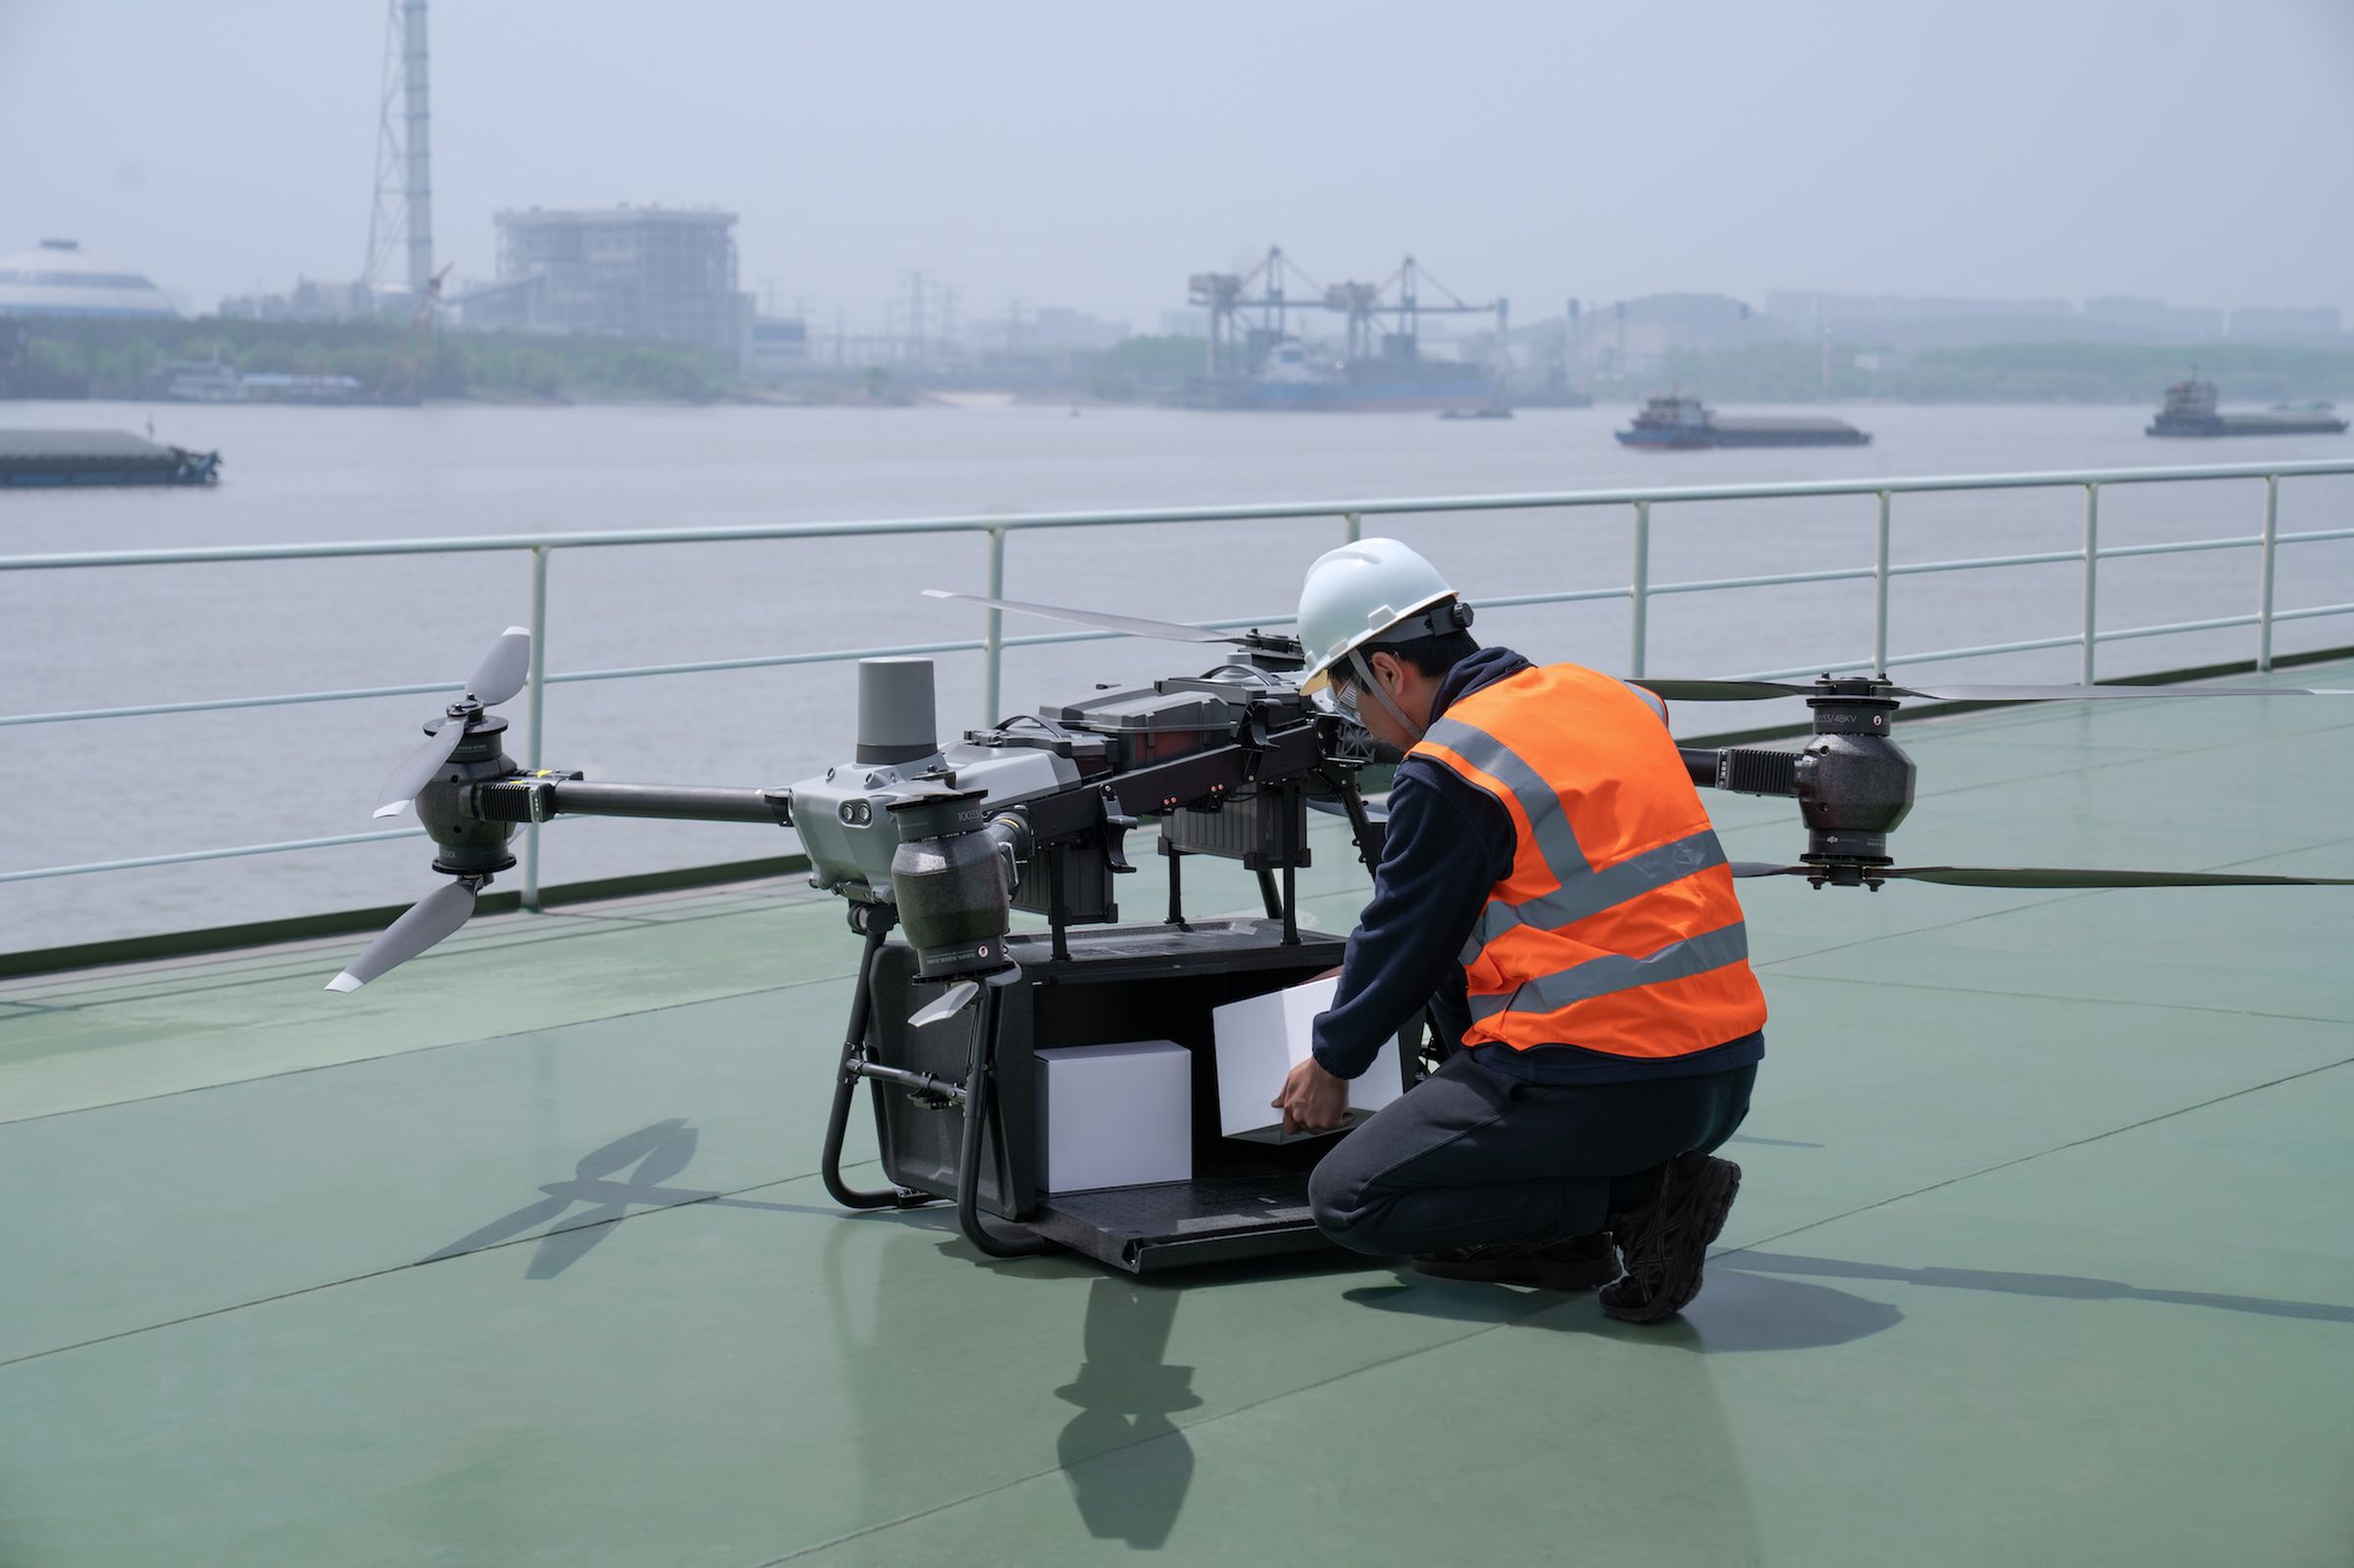 A photo of DJI’s FlyCart 30 drone. A person is next to it loading goods into a box.